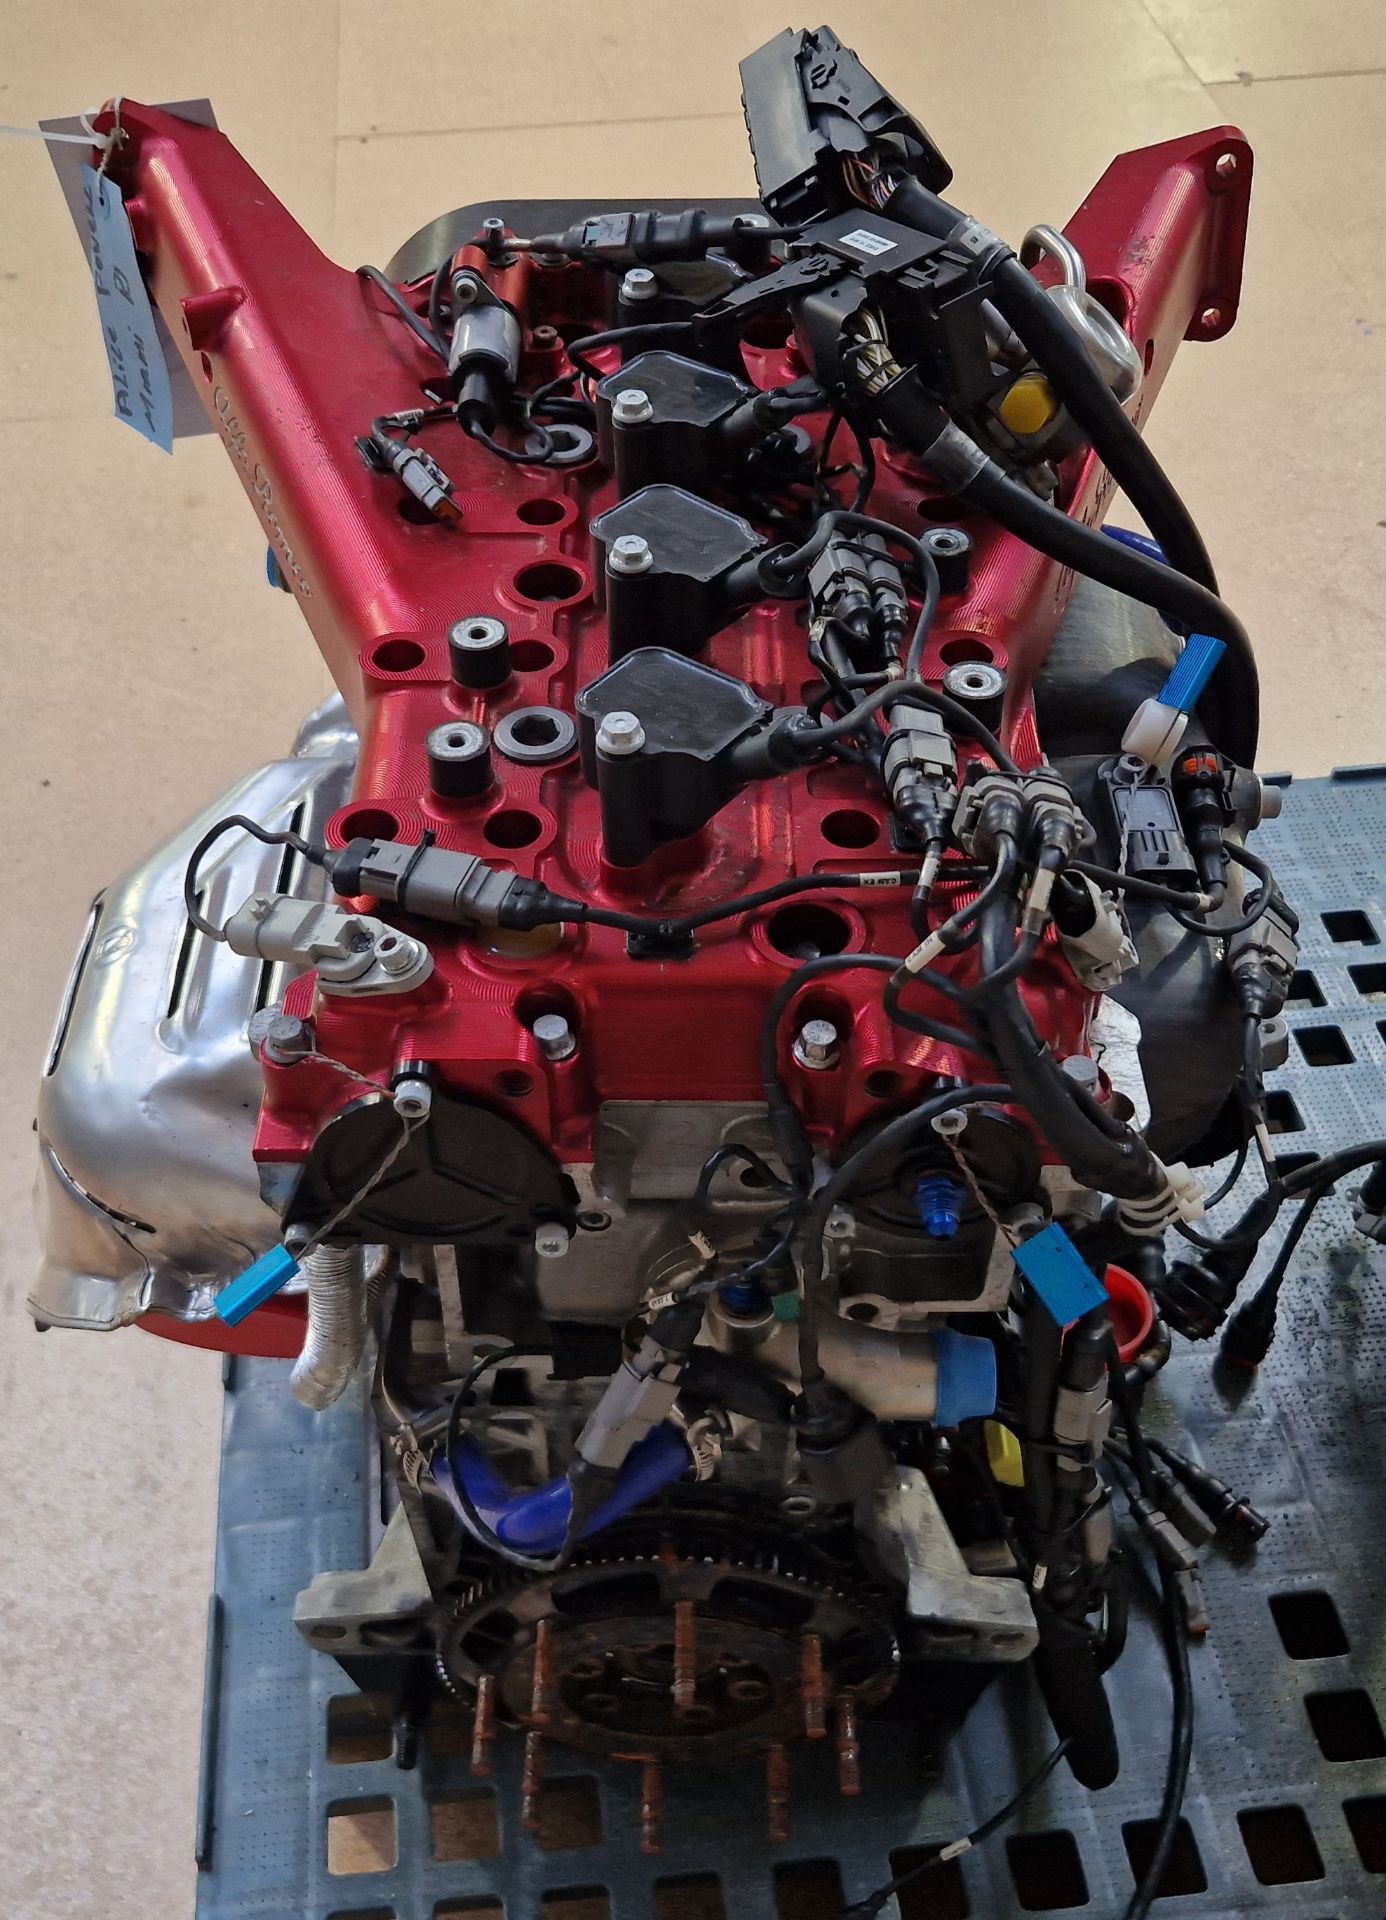 One ALPHA ROMEO 1.75L Twin Overhead Cam Turbocharged Race Car Engine, No. 079, known to be - Image 2 of 5